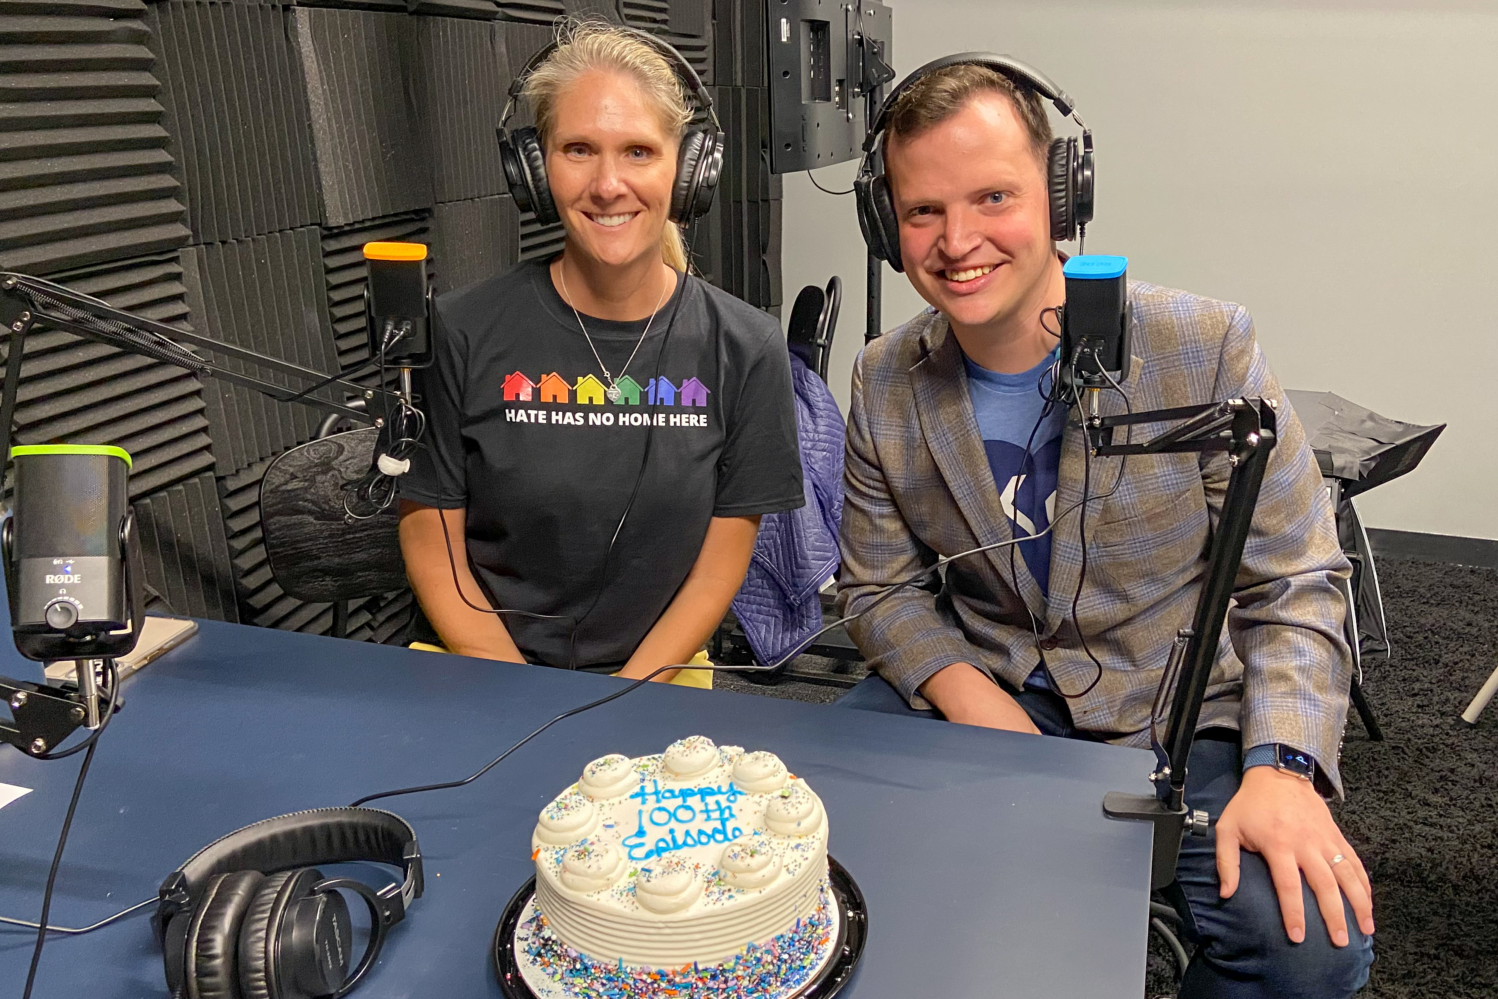 Image description: Hosts Bobbi and Alex pose in the podcast studio in front of their mics and a cake that reads 